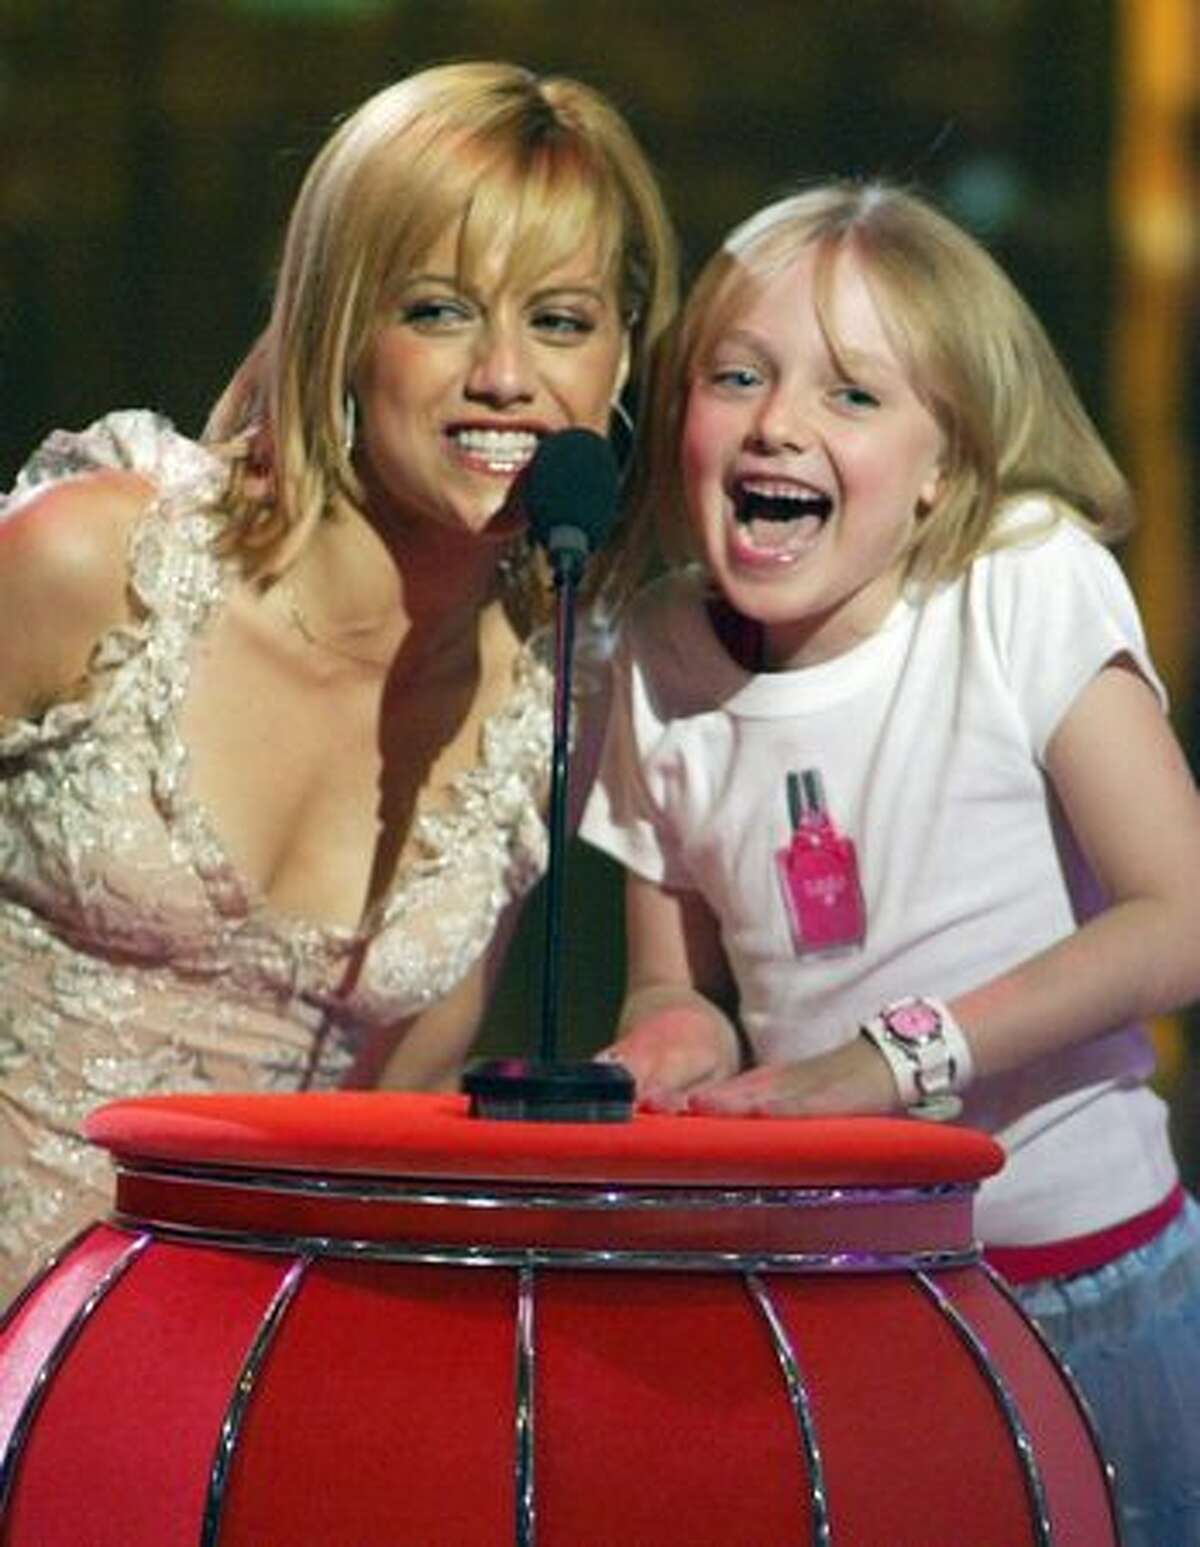 Brittany Murphy and Dakota Fanning present an award at the 2003 Teen Choice Awards on Aug. 2, 2003 in Universal City, Calif.